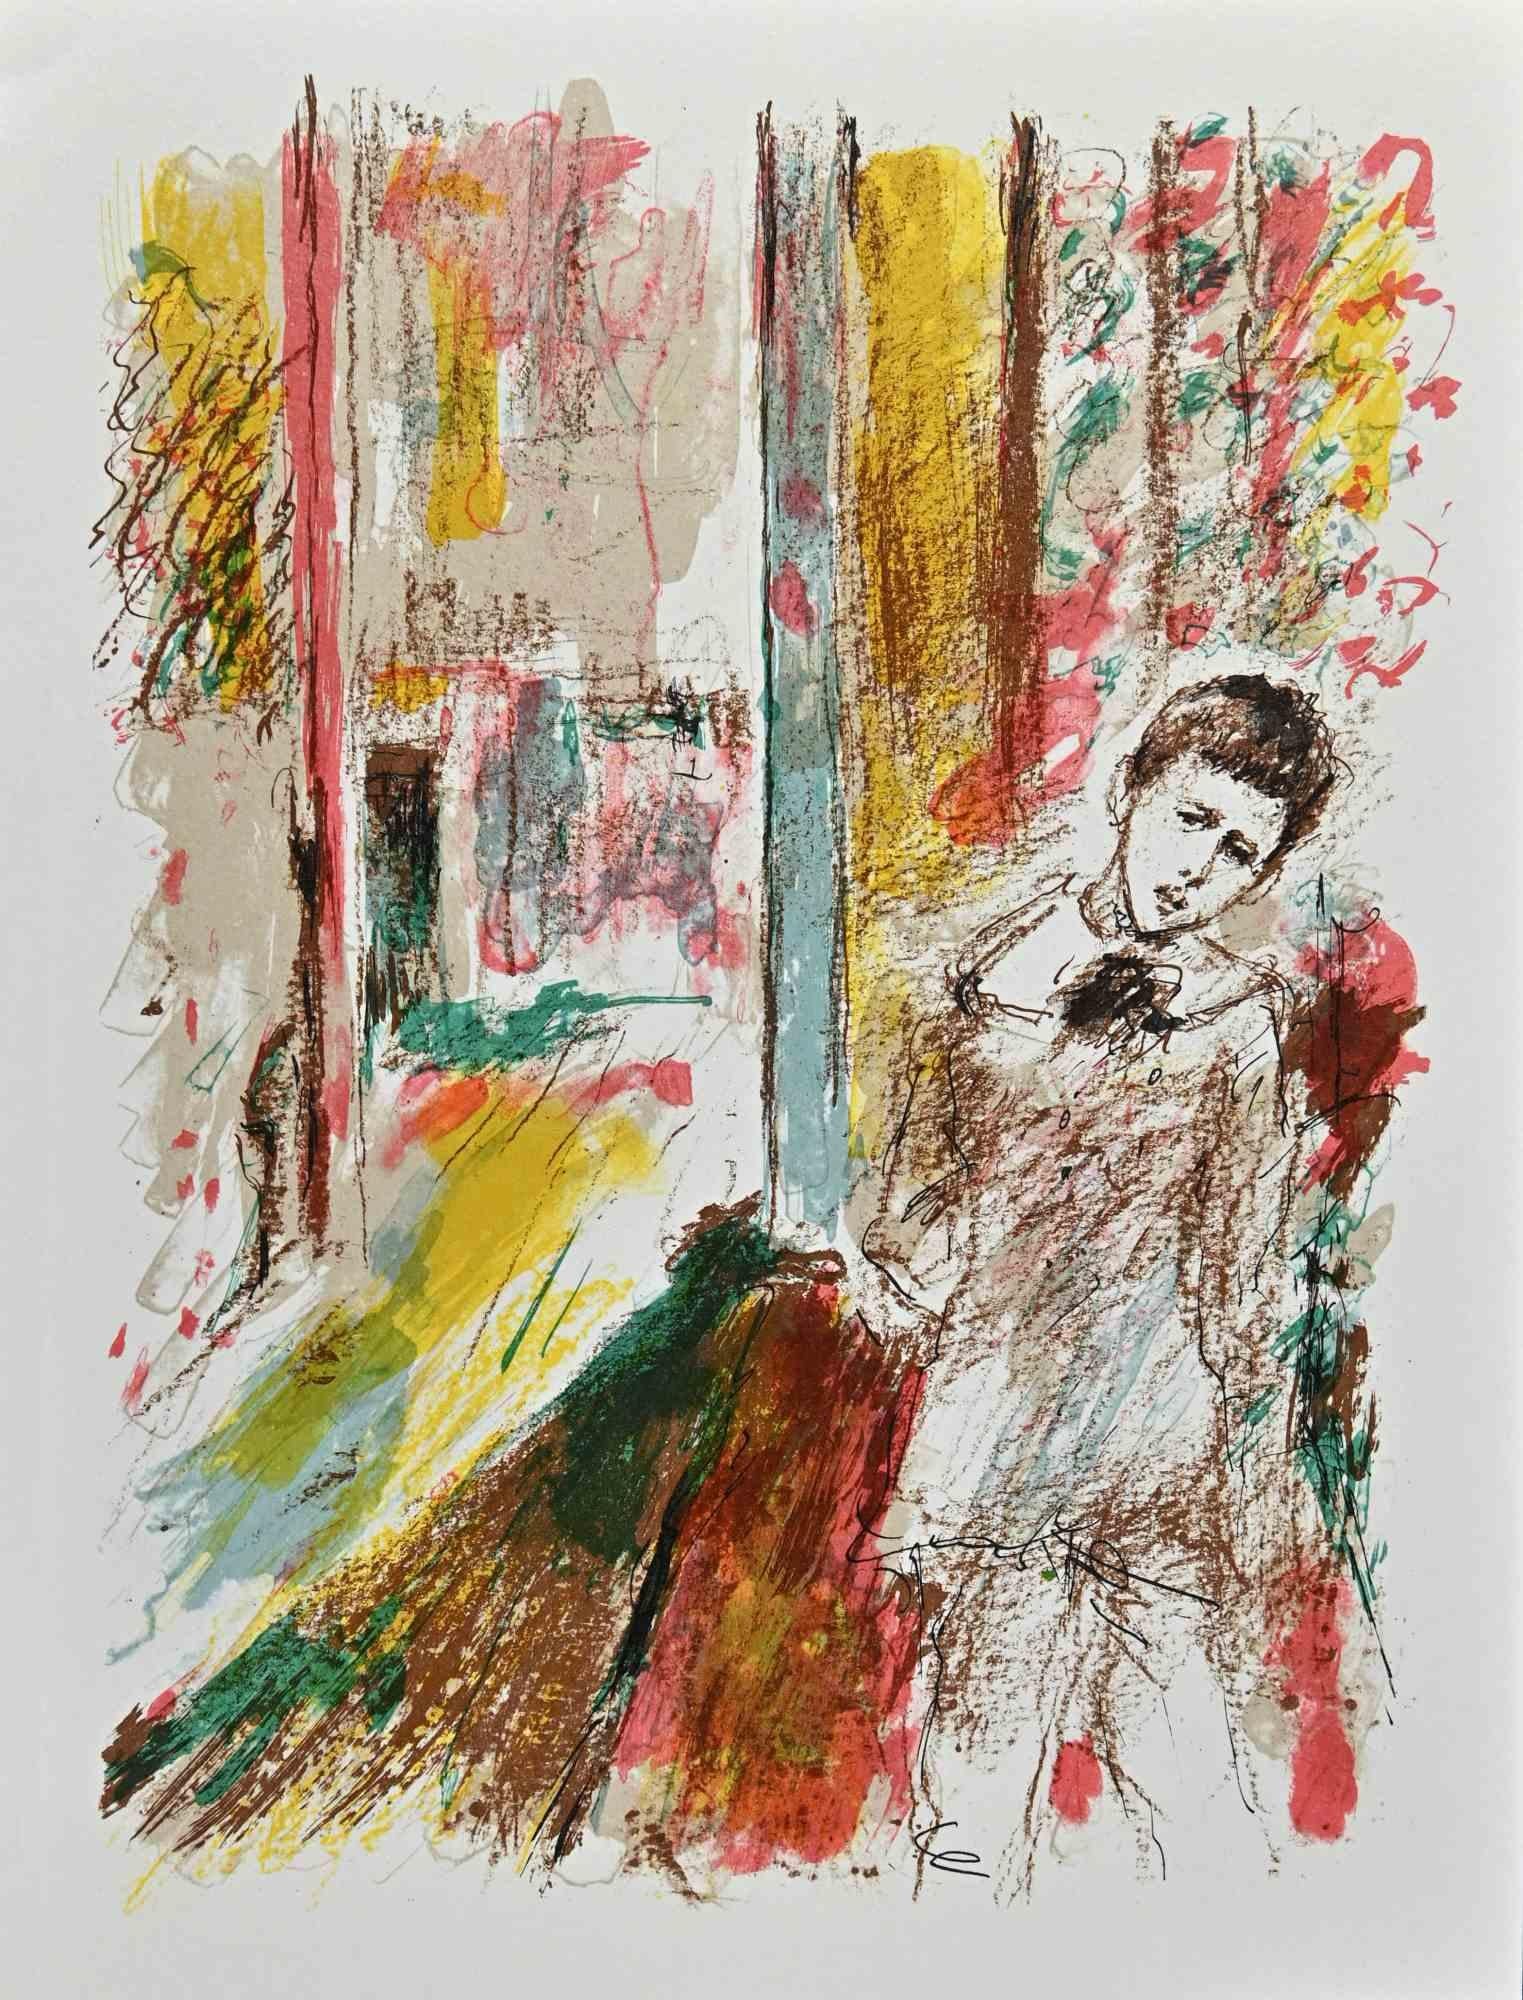 The Boy is an original lithograph realized by Jacques Pecnard in the Mid-20th Century.

Good conditions.

The artwork is depicted through harmonious colors in a well-balanced composition.